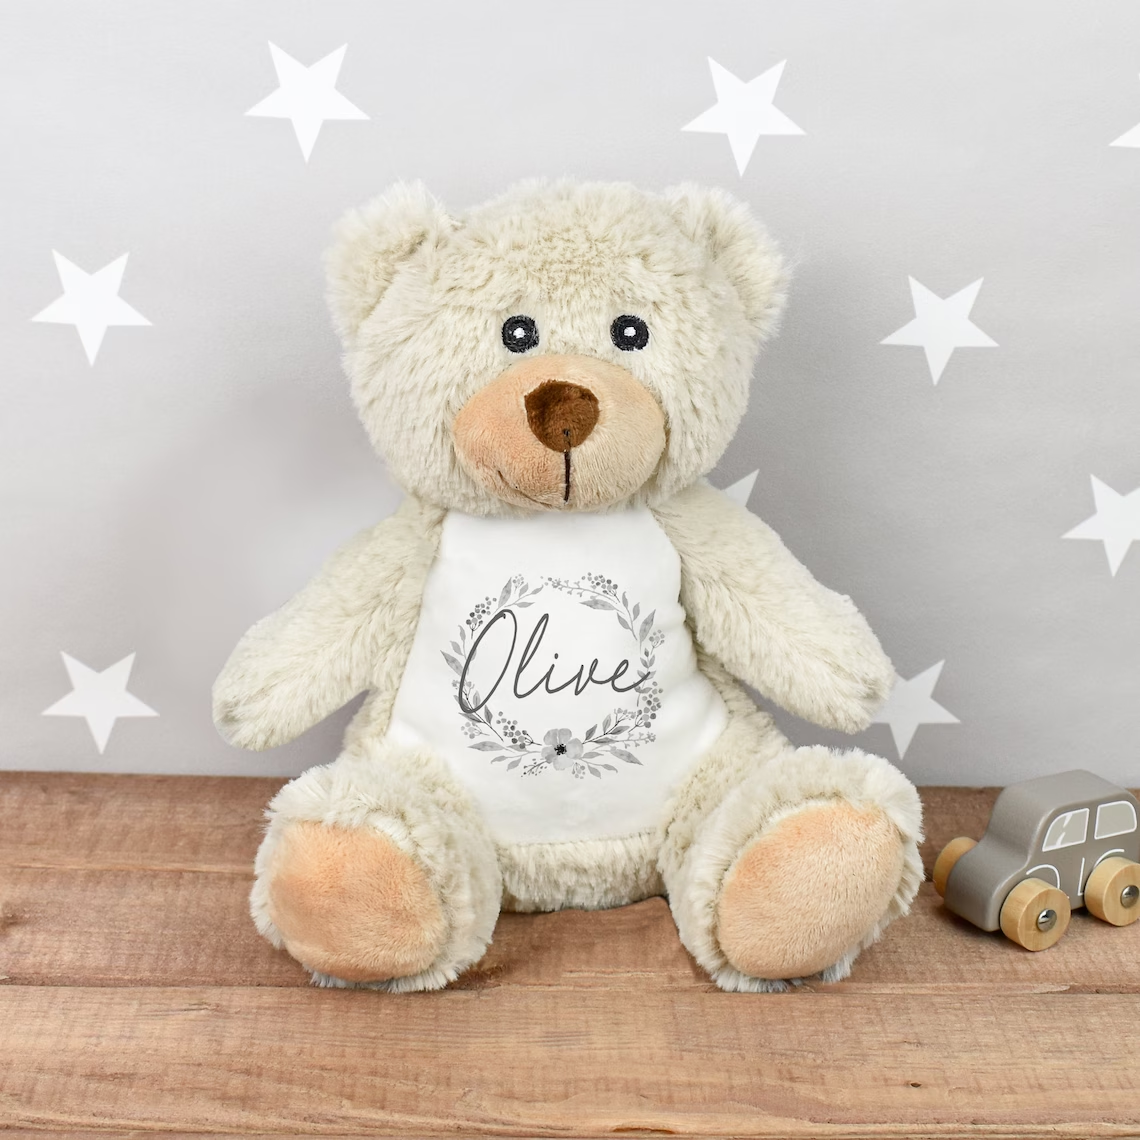 Personalized teddy bear soft toy stuffed animal - Best unique baby gifts for new parents - Baby Journey